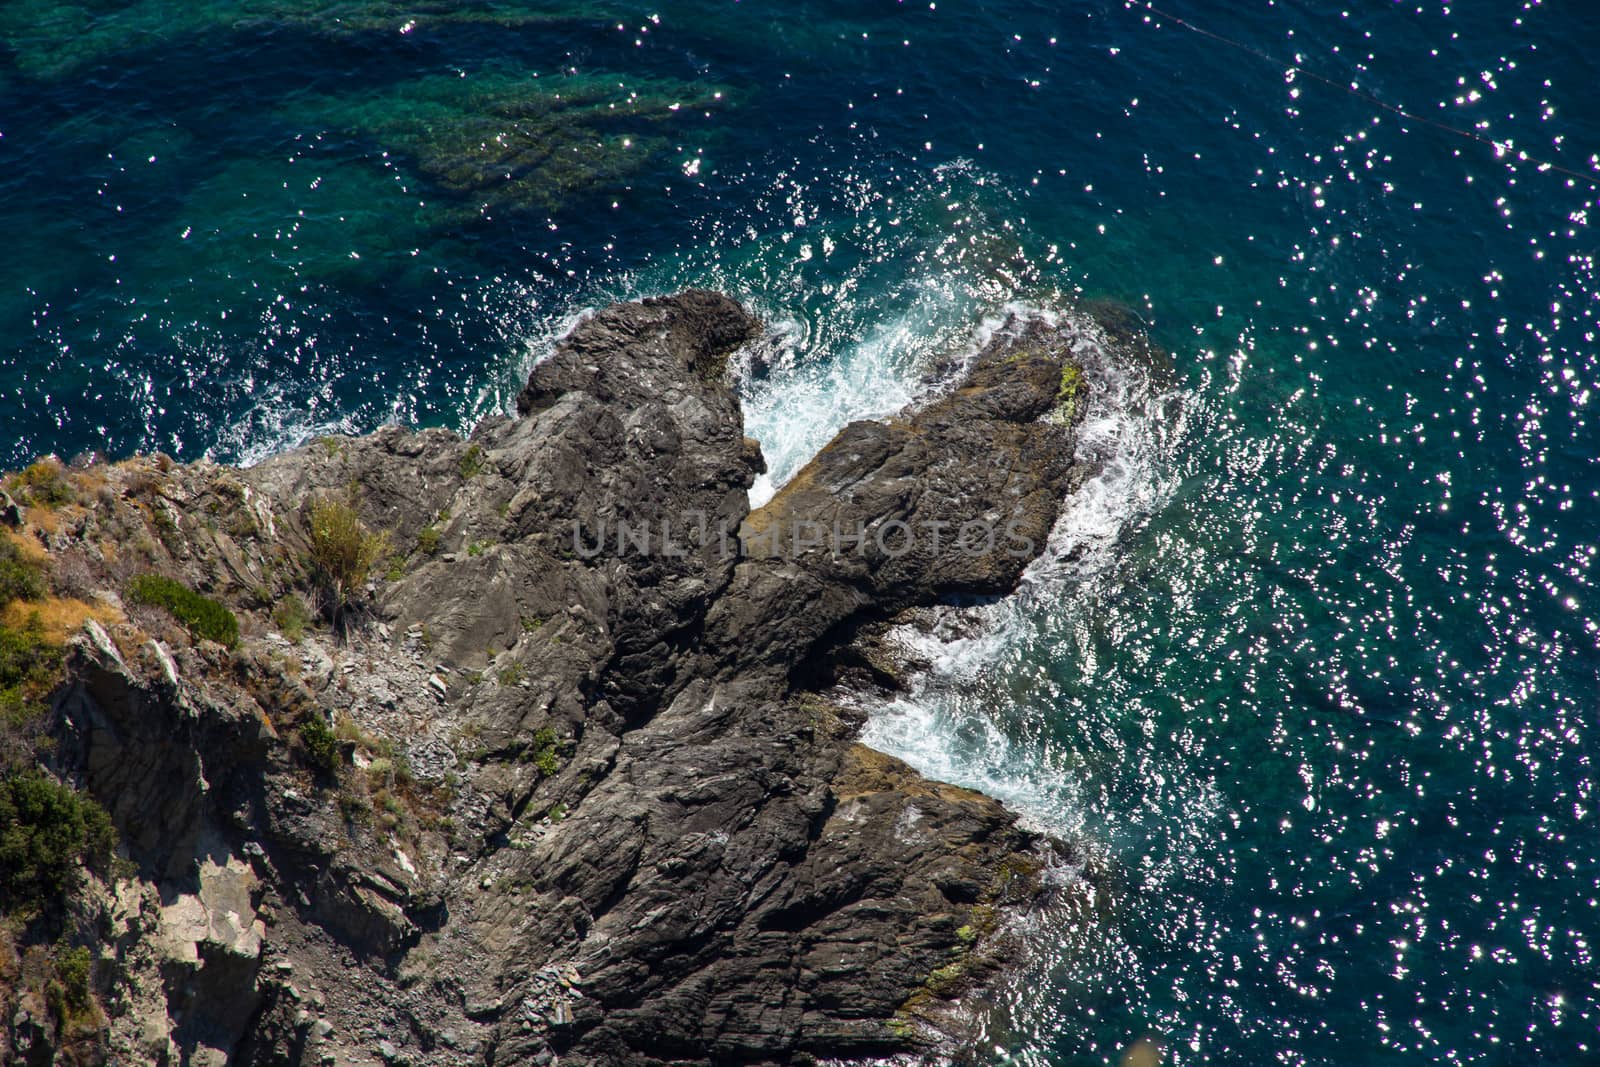 Picture taken from a cliff down onto the seashore